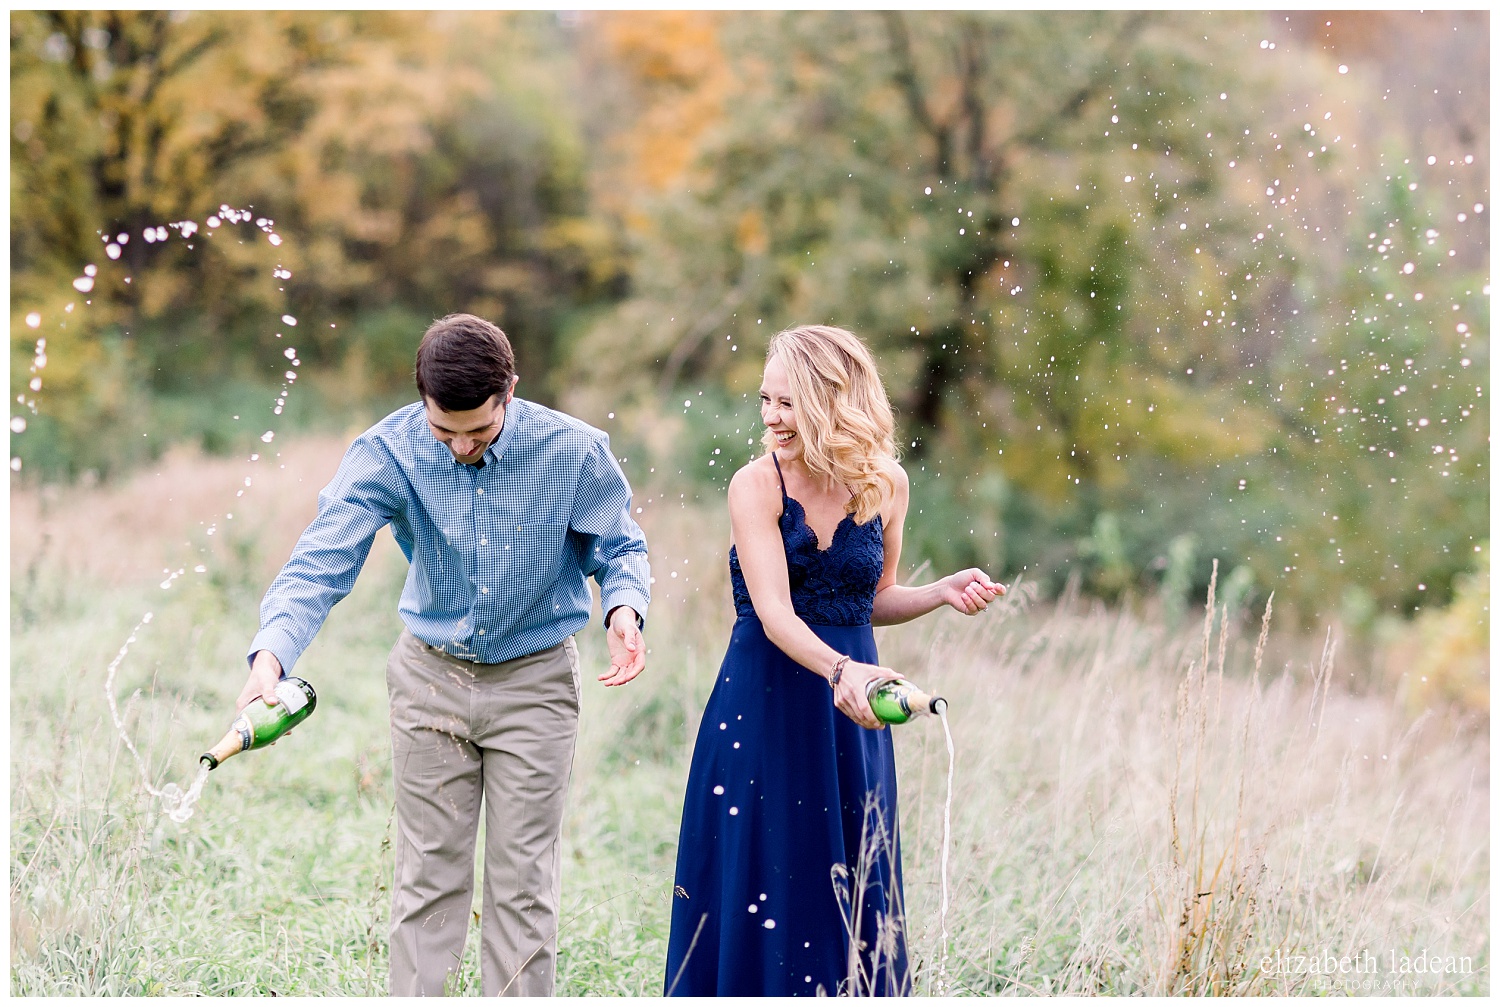 Colorful-Fall-Engagement-Photos-in-KC-C+B-2018-elizabeth-ladean-photography-photo_1809.jpg